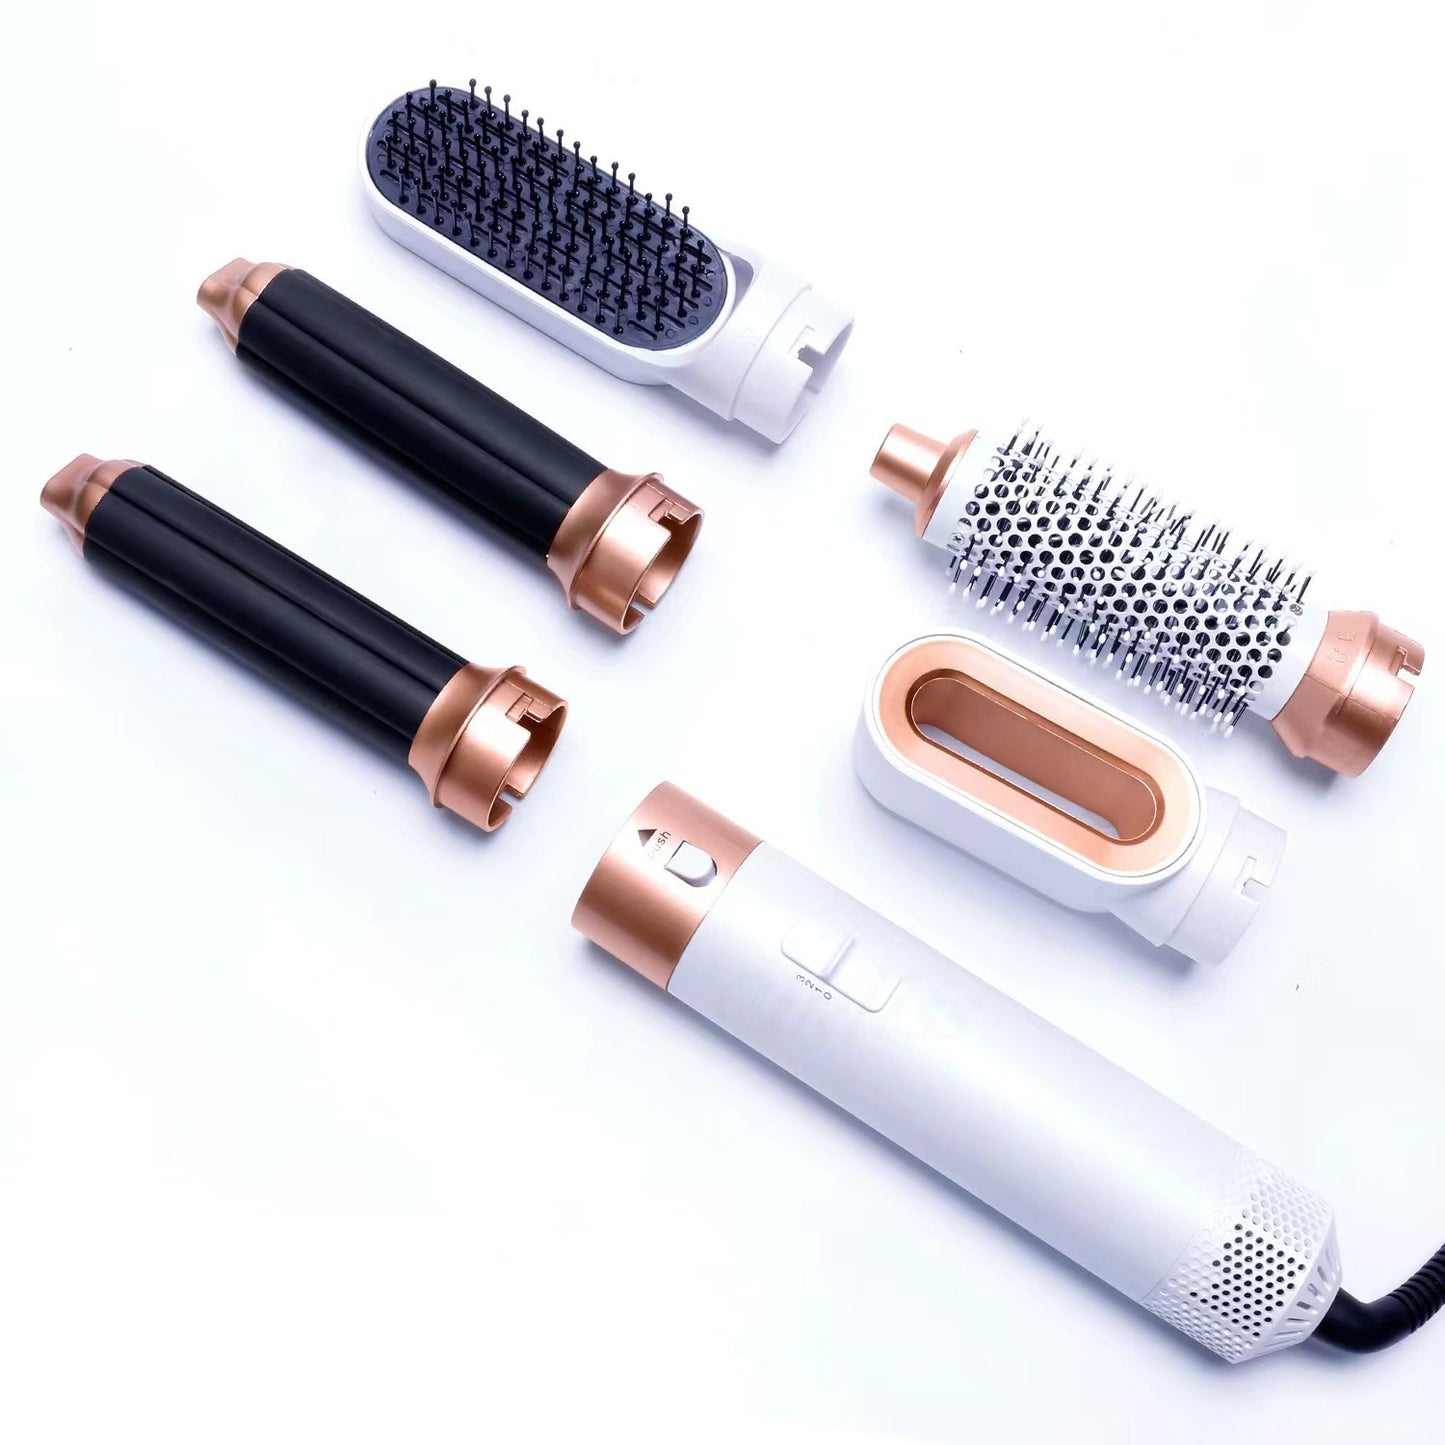 5-in-1 Electric Hair Styling Set